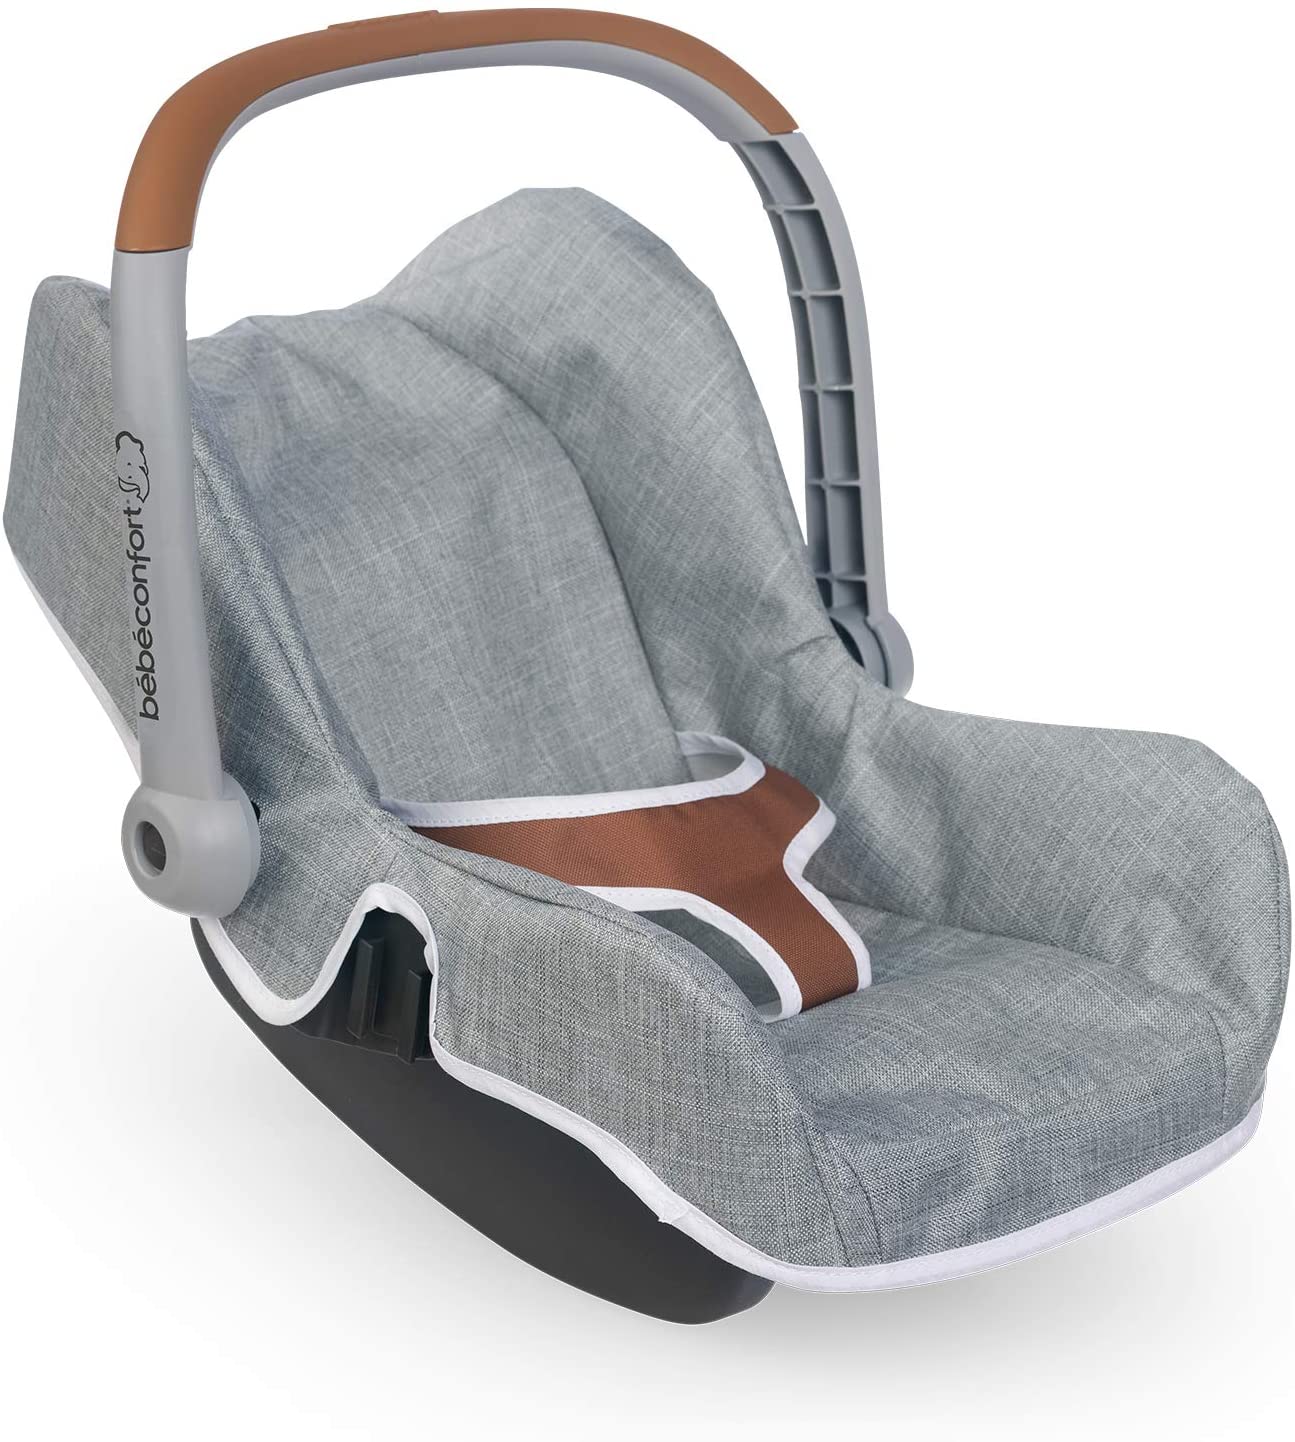 Smoby Comfortable Baby Seat, Grey, Colour (240210)